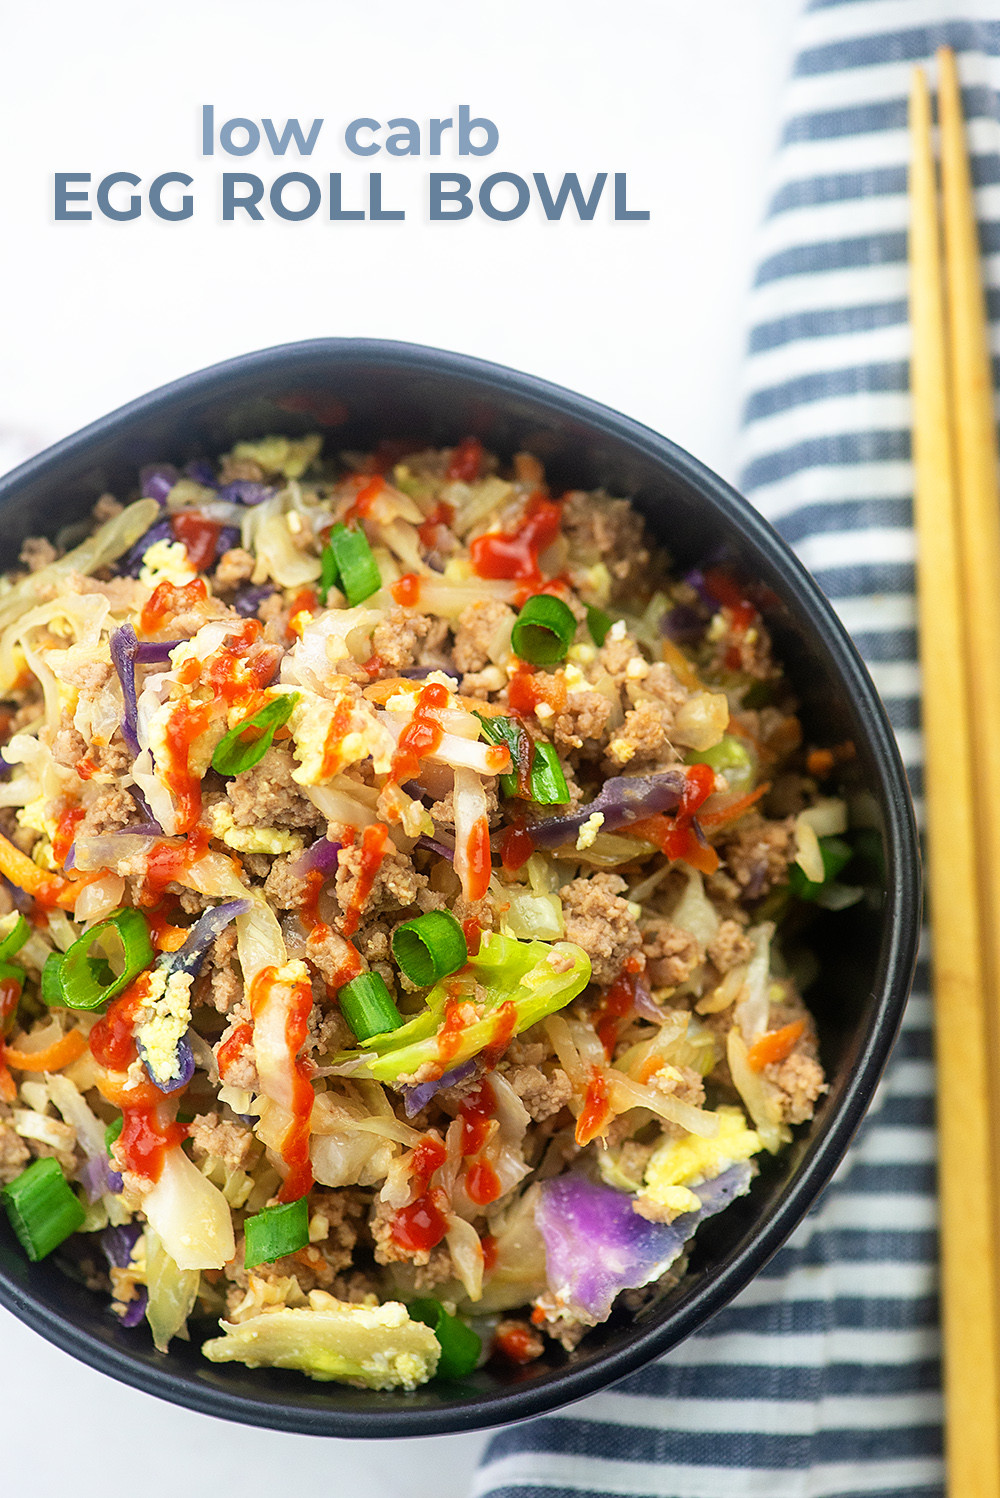 Low Carb Keto Egg Roll In A Bowl
 Keto Egg Roll in a Bowl Recipe better than take out